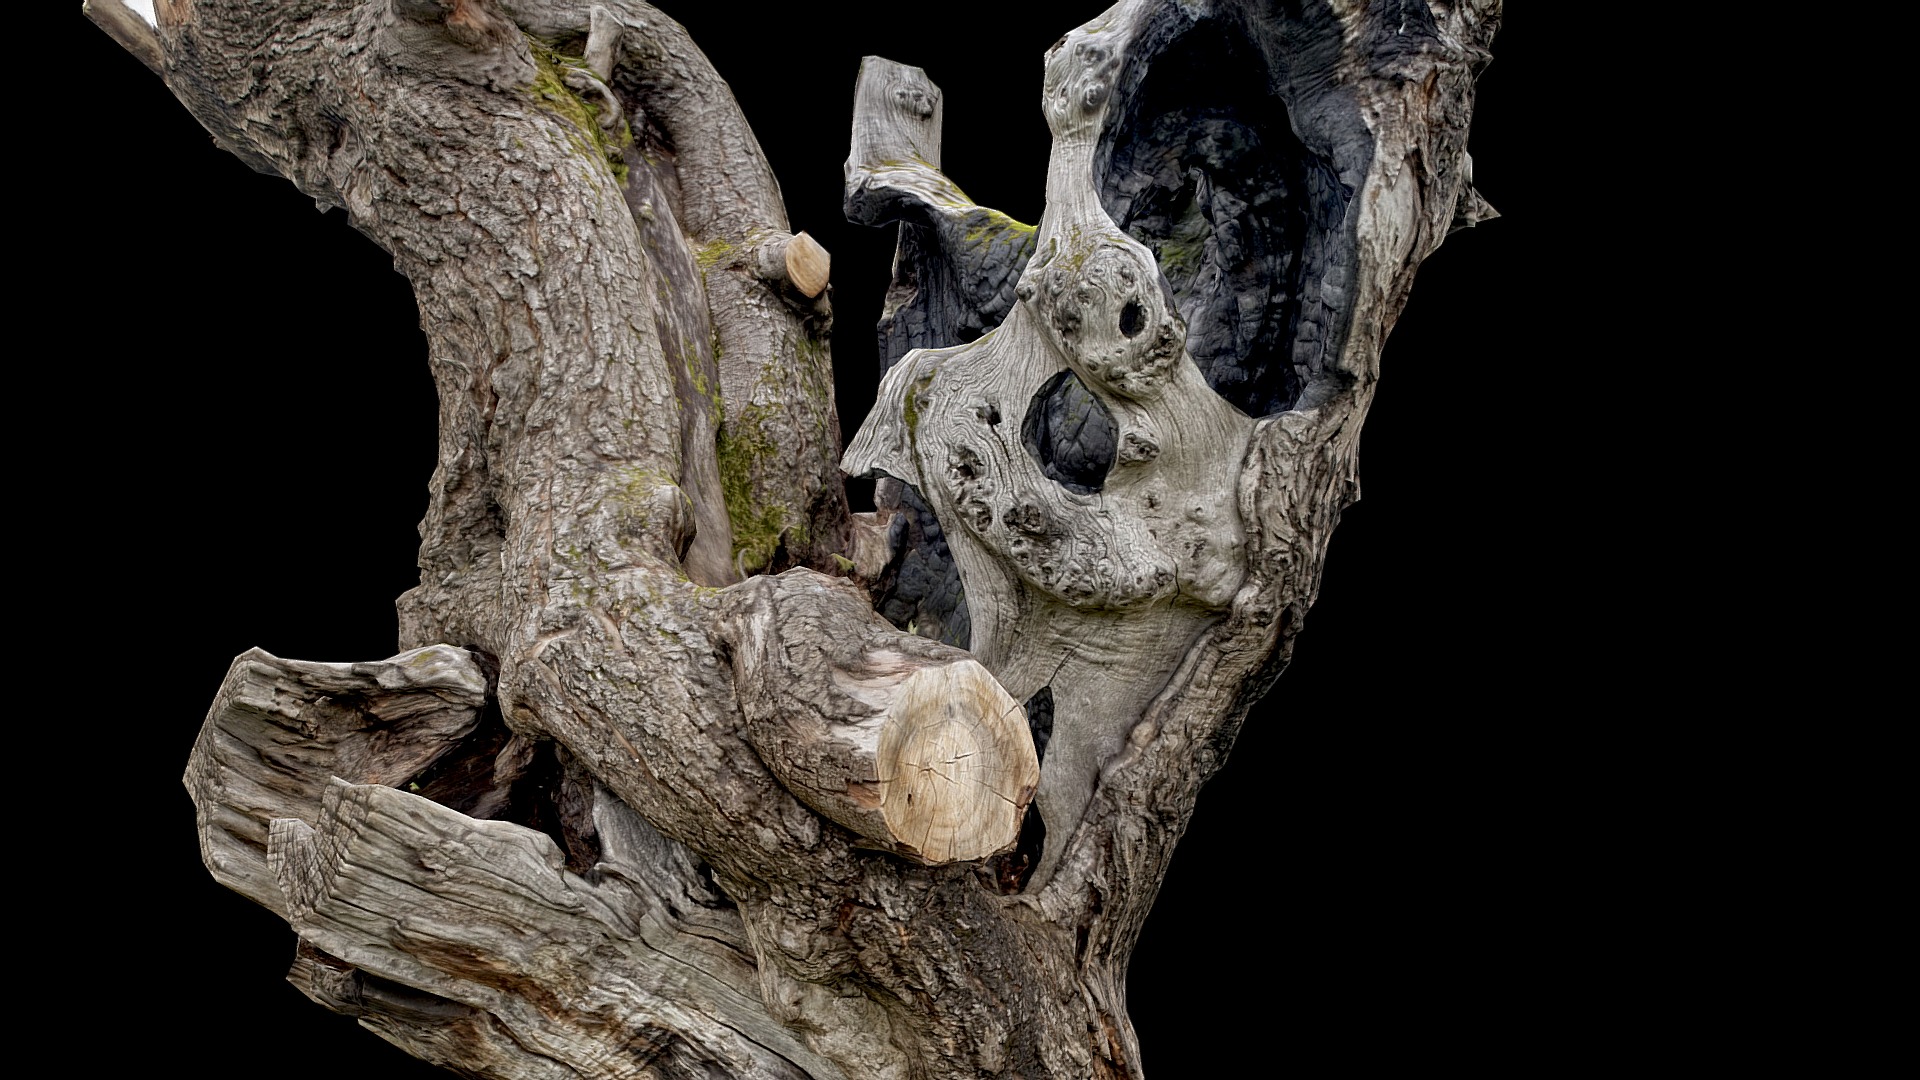 3D model tree trunk - This is a 3D model of the tree trunk. The 3D model is about a tree trunk with a skull on it.